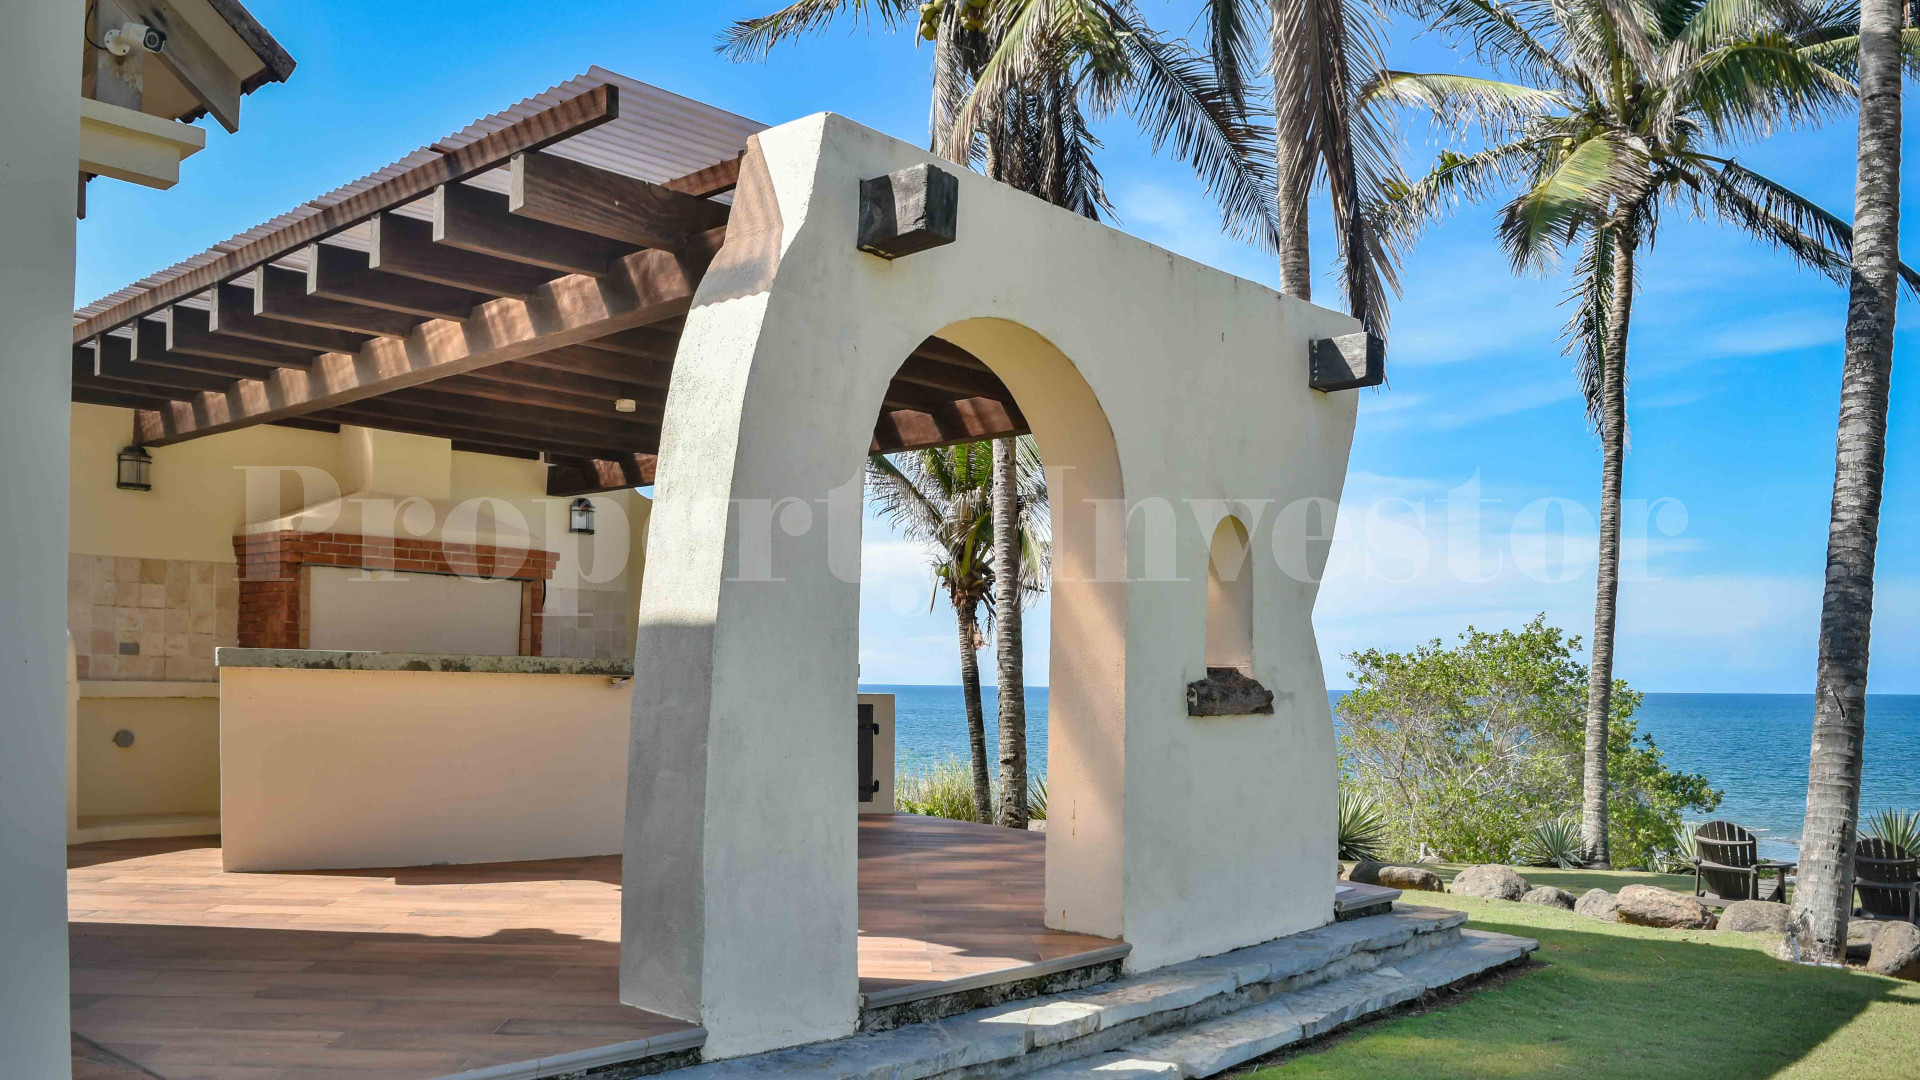 Stunning 4 Bedroom Luxury Spanish Colonial Revival Home for Sale in Pedasí, Panama